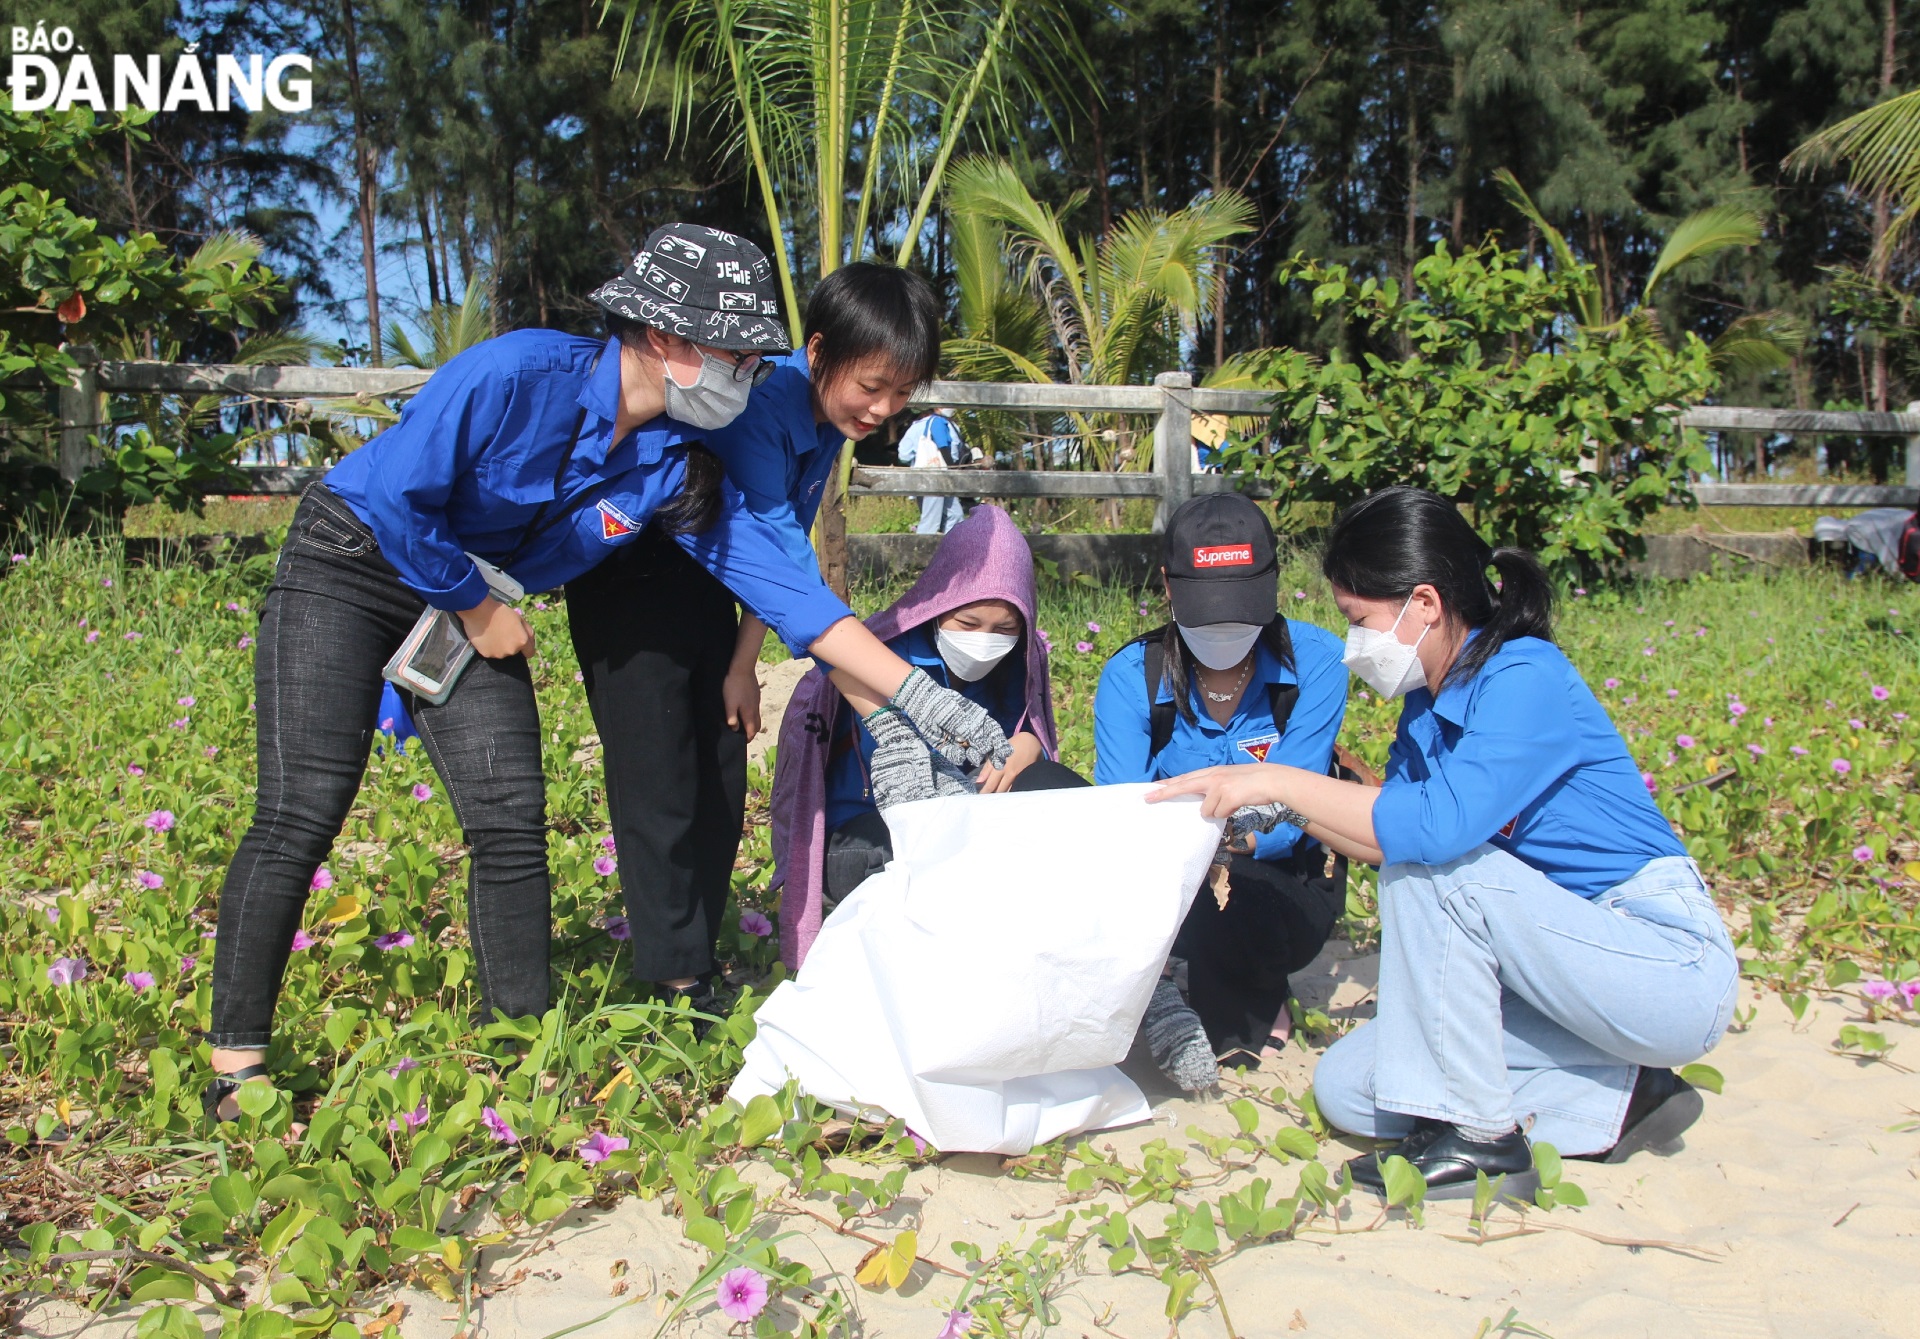 Youth Union members and young people in Da Nang came out to clean up the environment on the Nguyen Tat Thanh Beach. Photo: Ngoc Quoc